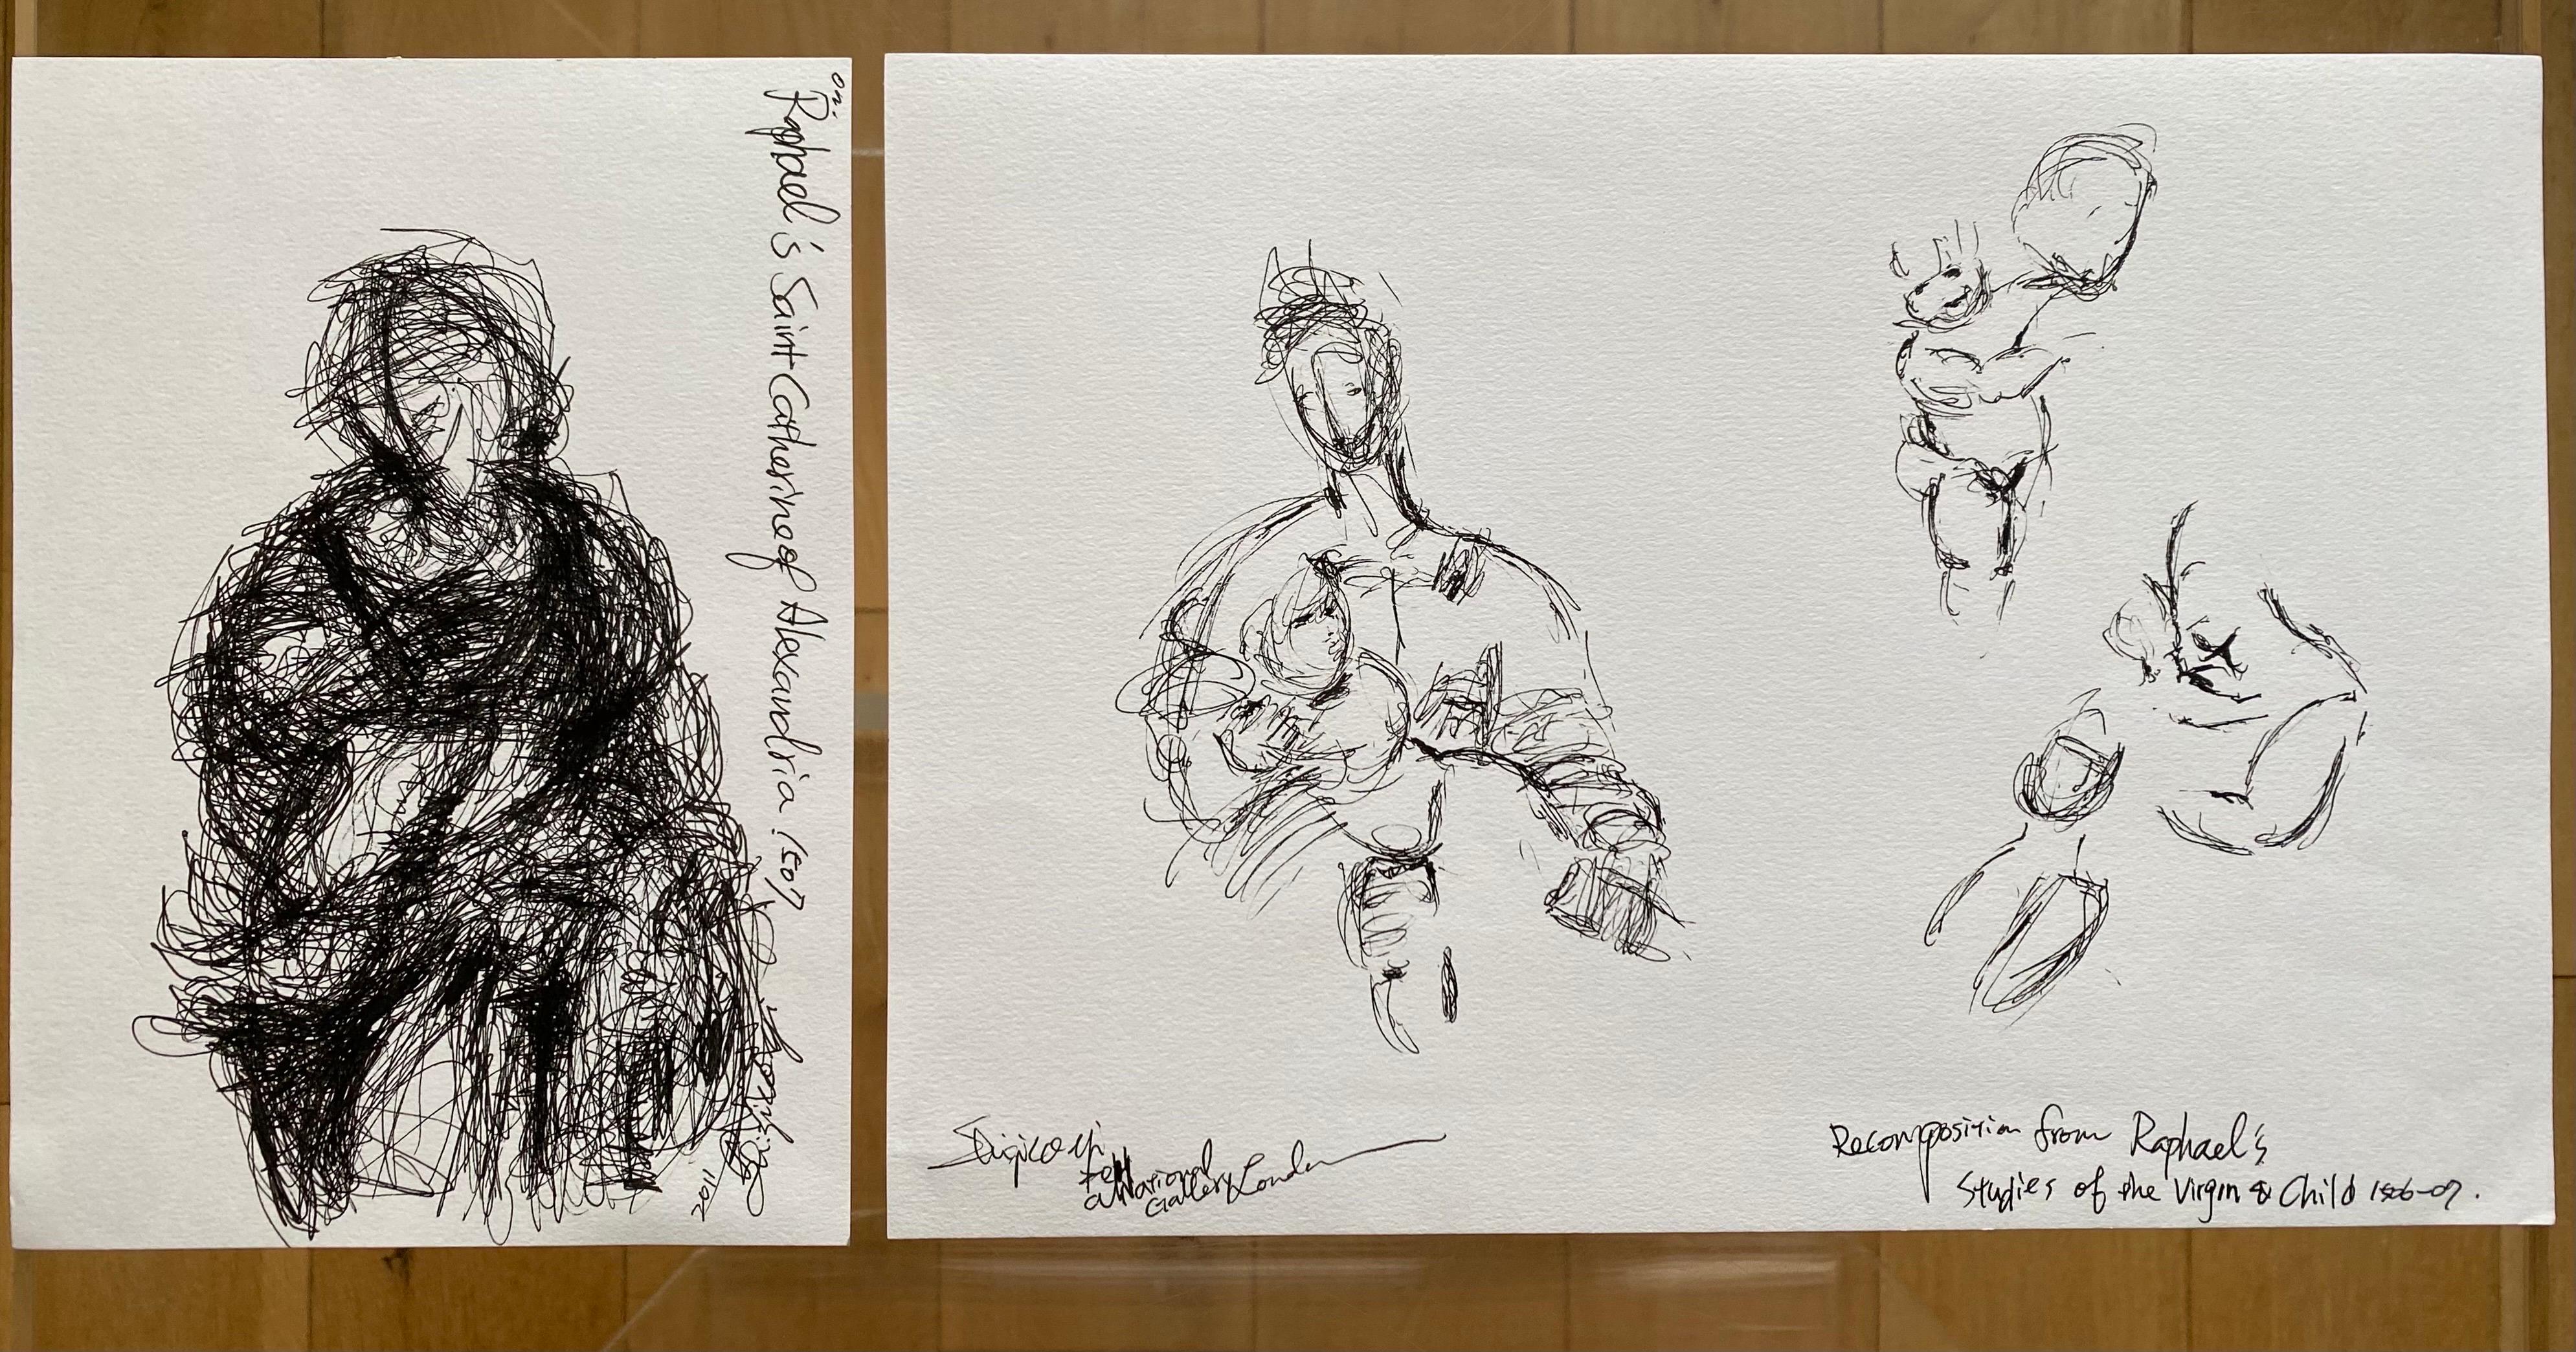 Free shipping worldwide ! This set of drawings included Two Studies of Raphael's paintings in National Gallery, London where Shizico Yi learned her craft in drawings from old masters in Museums, a project she started from 2005.
These sets are from a